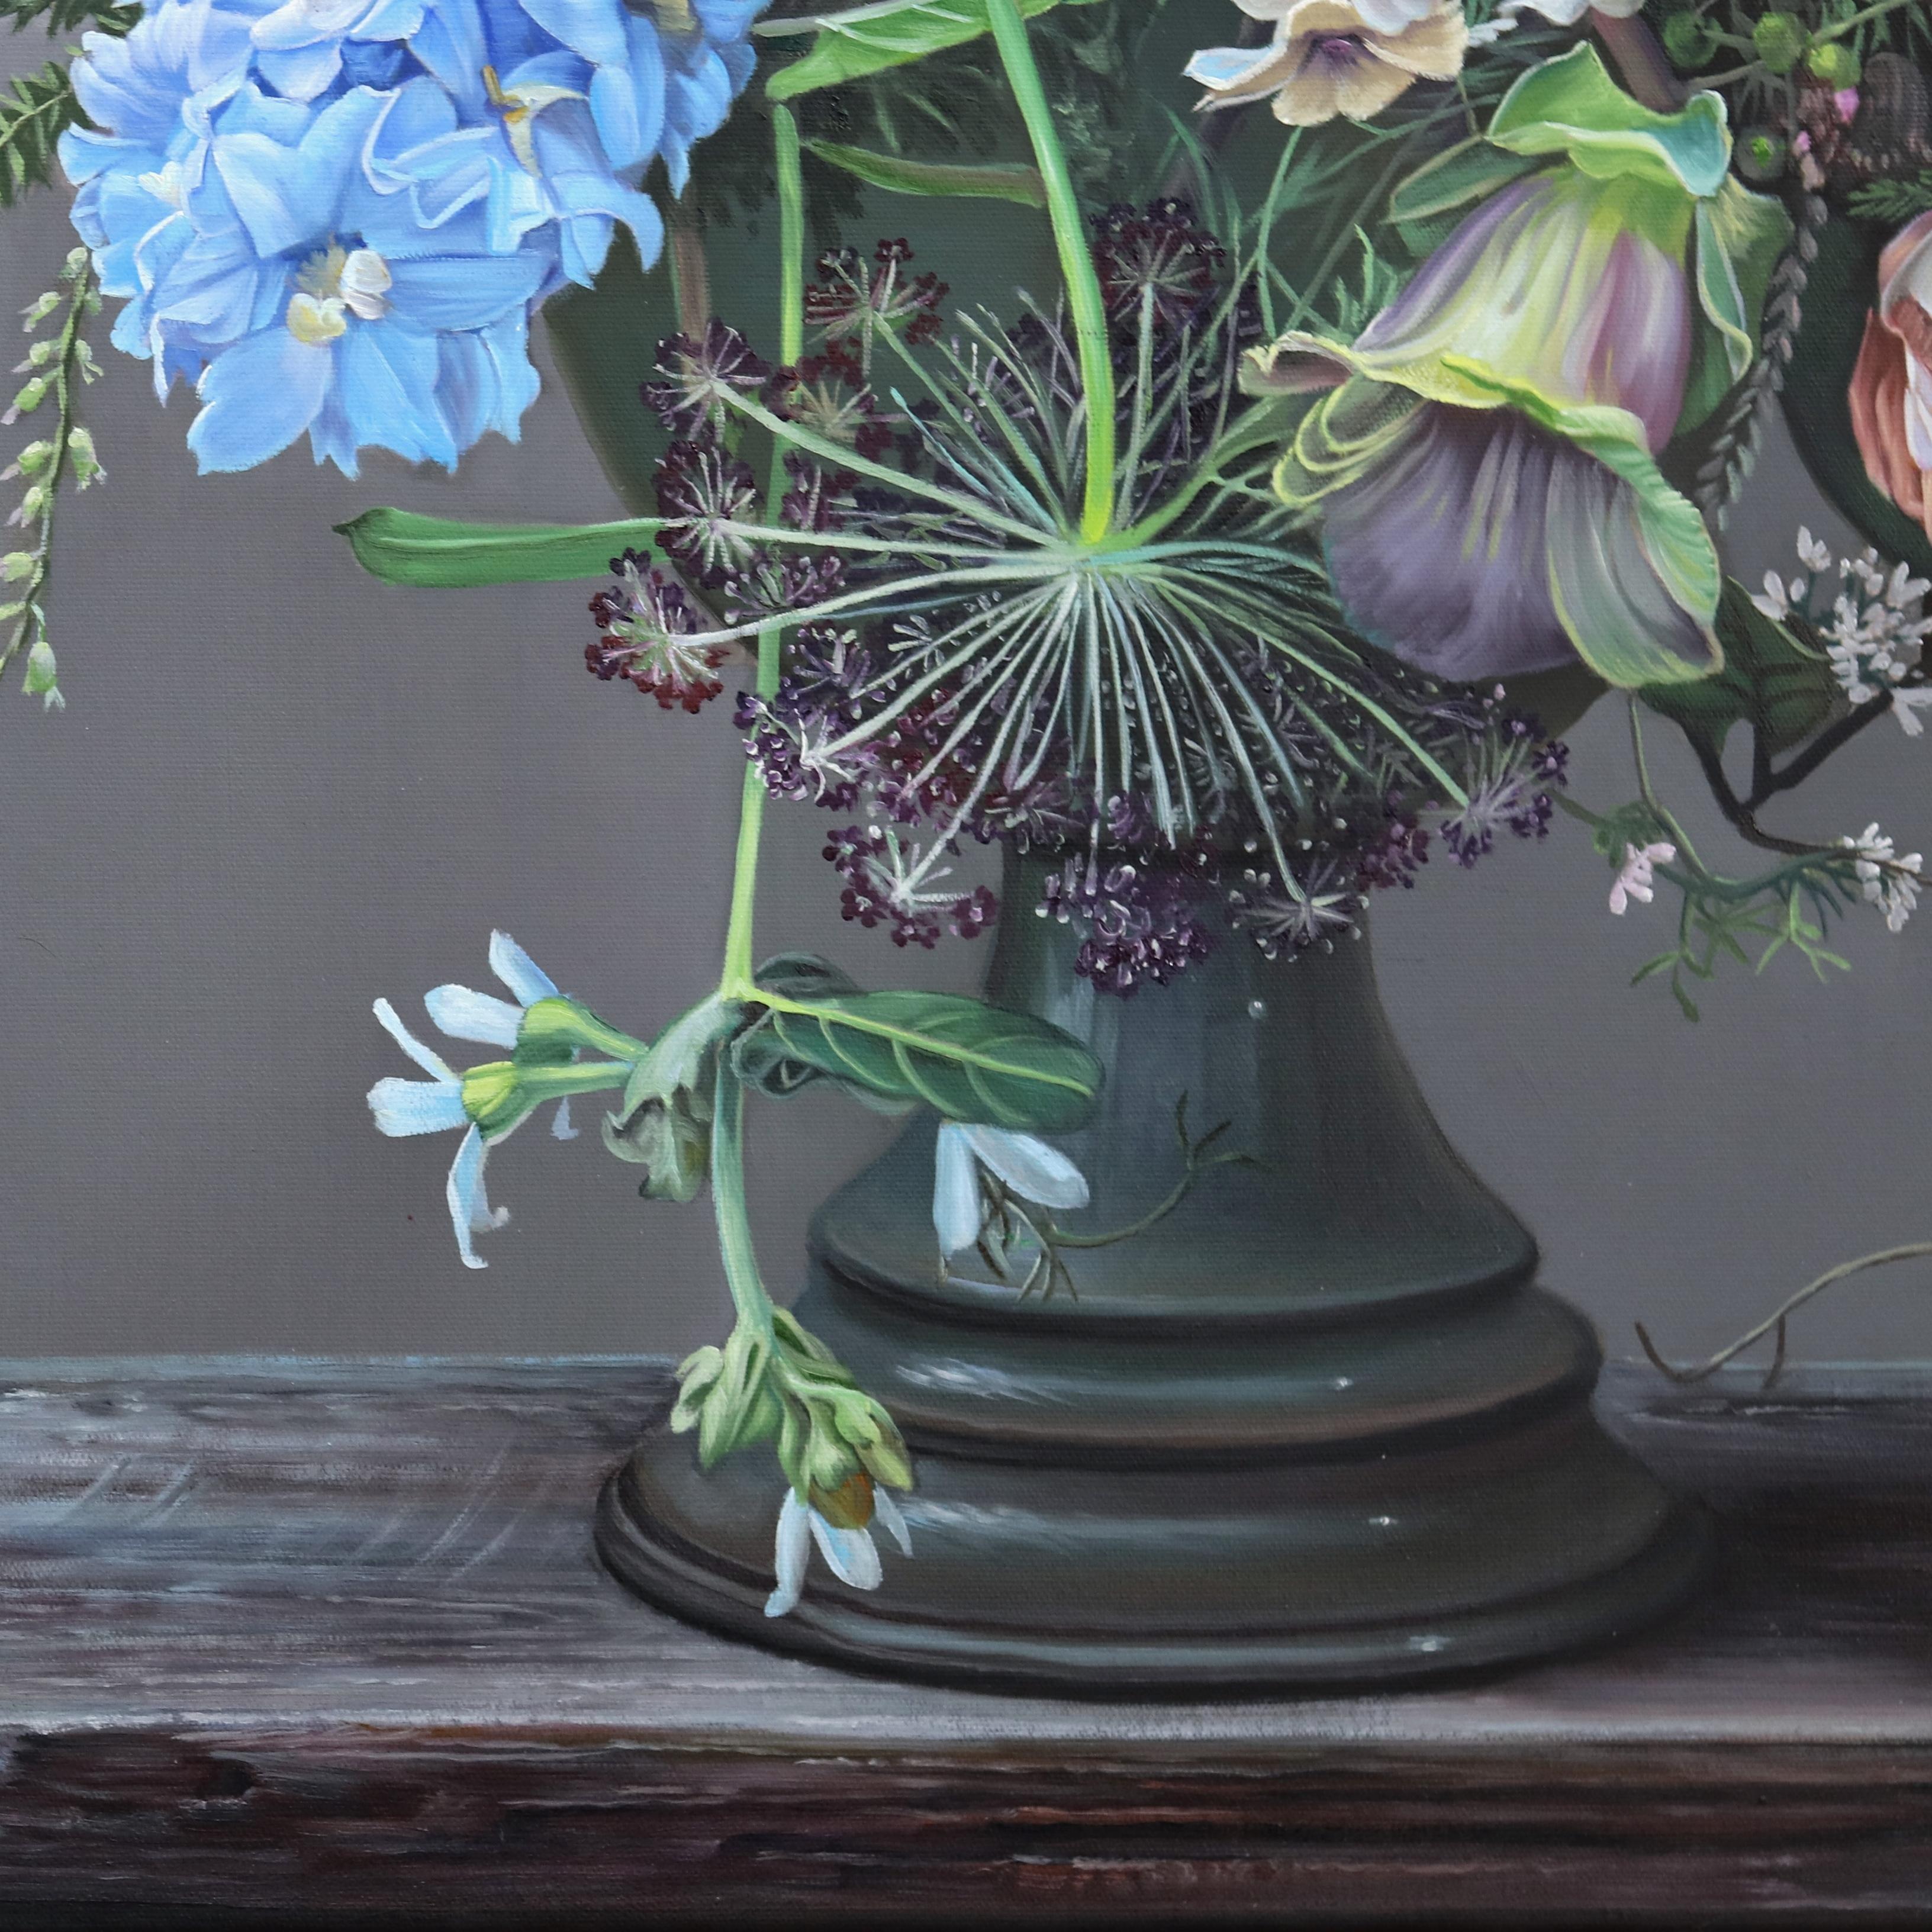 Touching Souls - Hyperrealist Floral Still Life Oil Painting 4